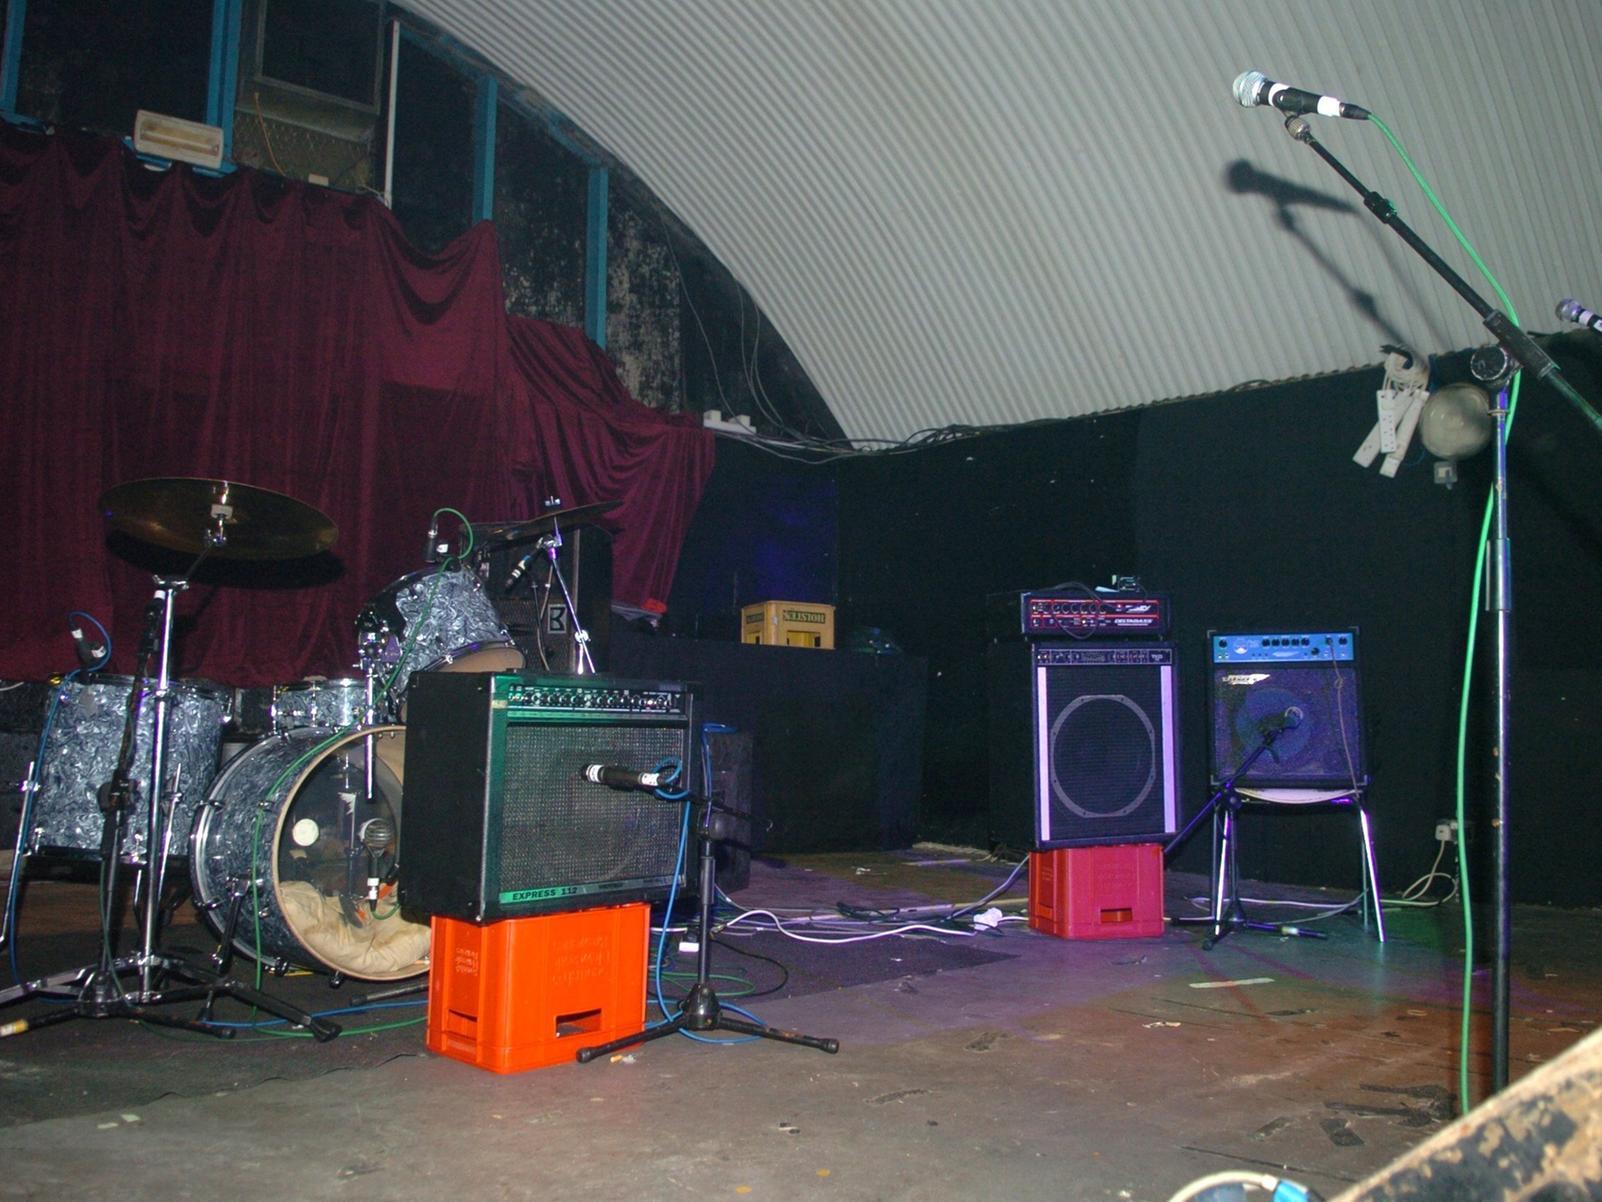 Disappointed Pete Doherty fans were left staring at an empty stage as the show was called off. When: 25 January 2006